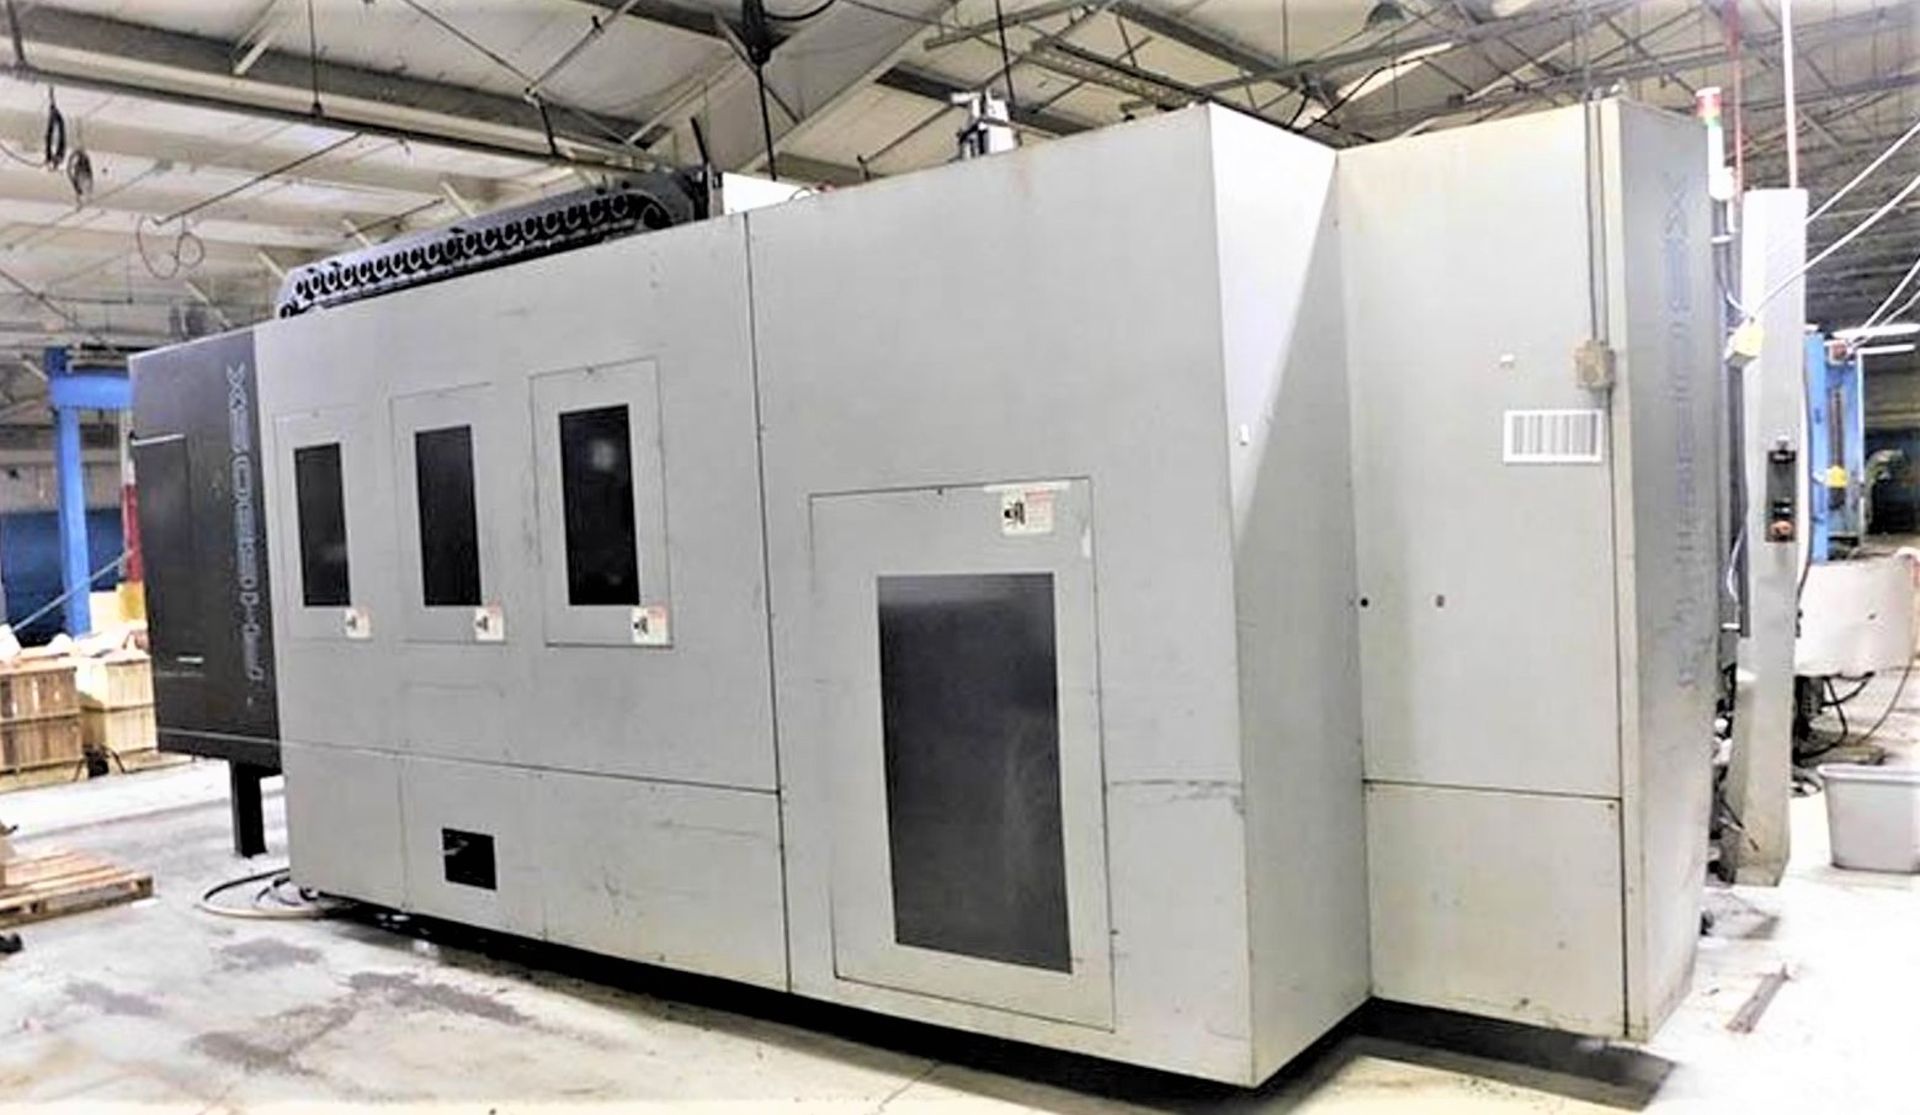 24.8 X 24.8 Pallets Toyoda FH630SX CNC 4-Axis Horizontal Machining Center, S/N NS1429, New 12/2005 - Image 12 of 14